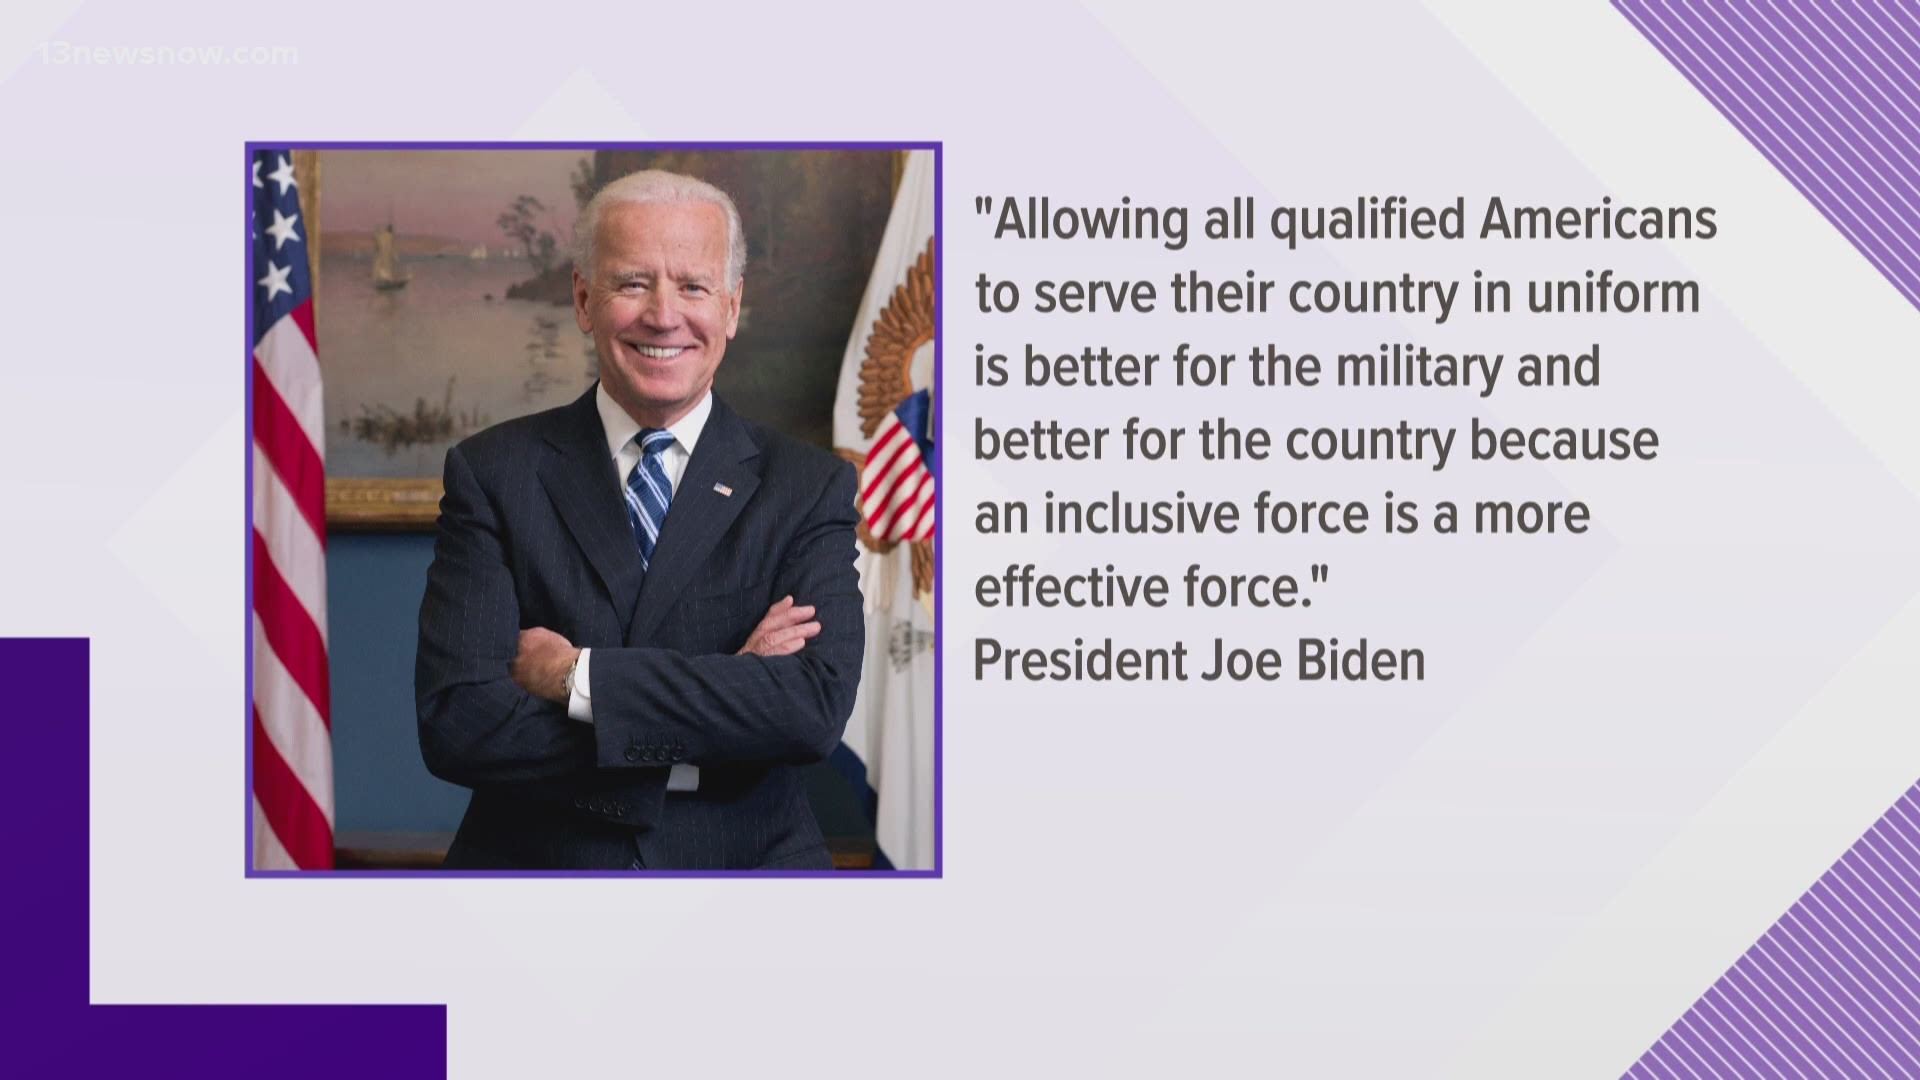 President Joe Biden overturned former President Donald Trump's policy that aimed to ban transgender troops from service in the U.S. military.